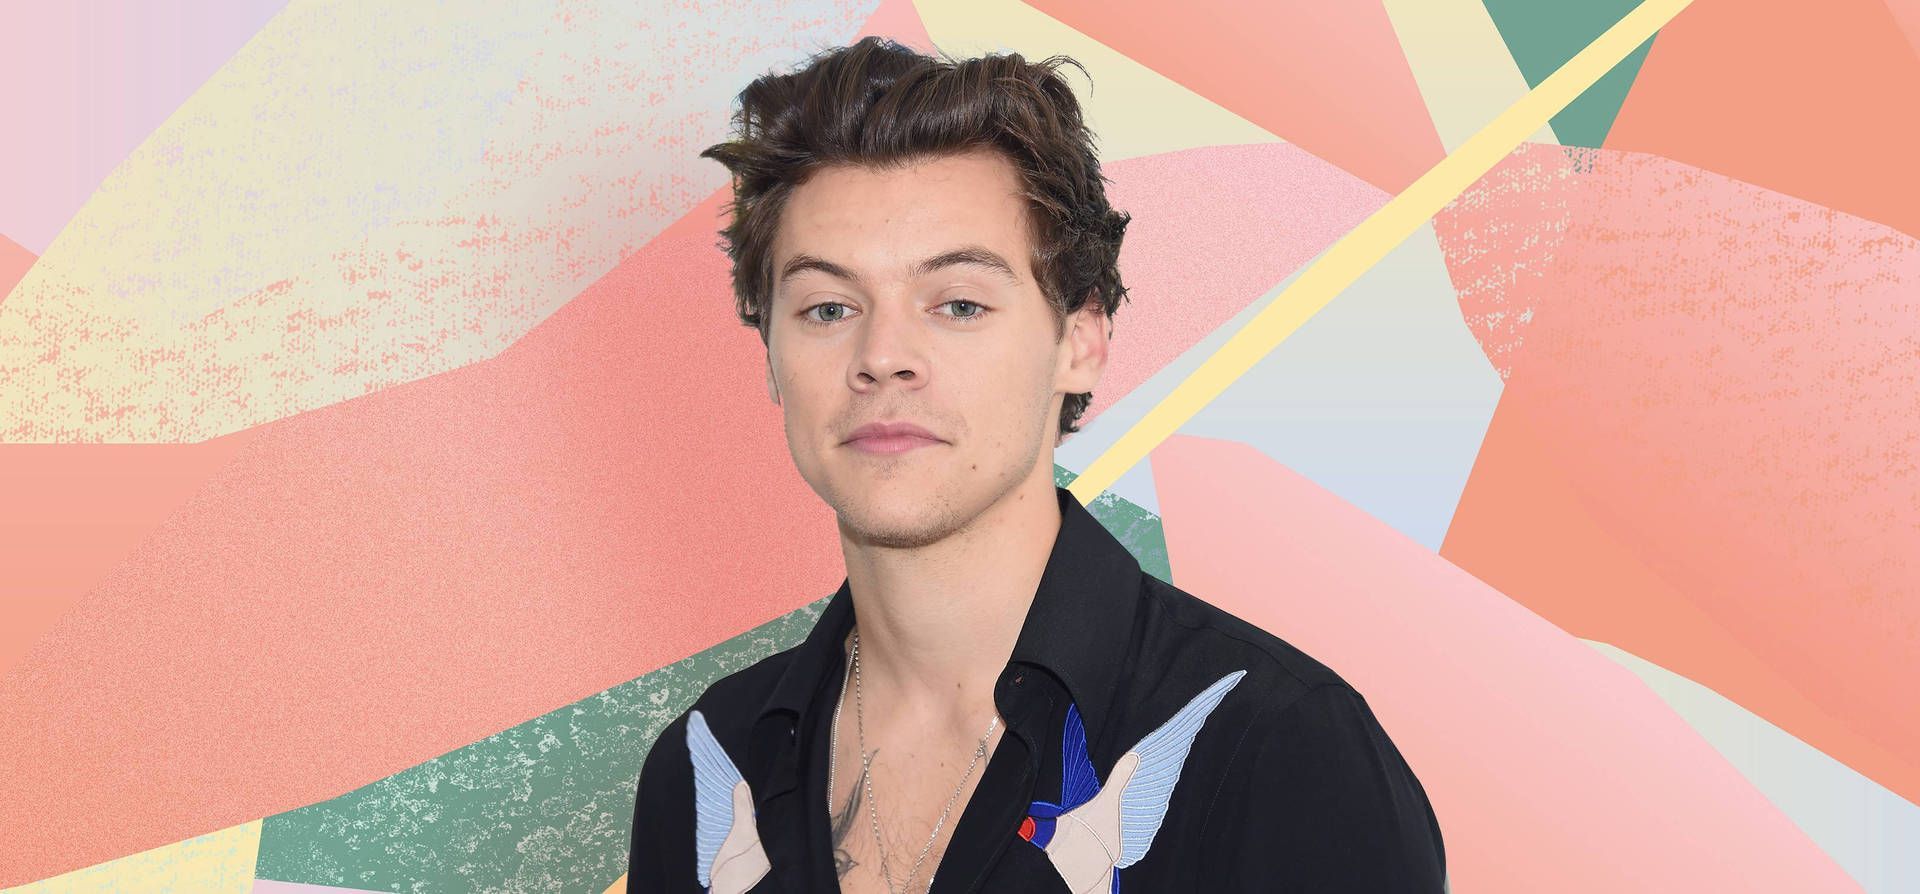 Harry Styles has been named the new face of Gucci's new fragrance - Harry Styles